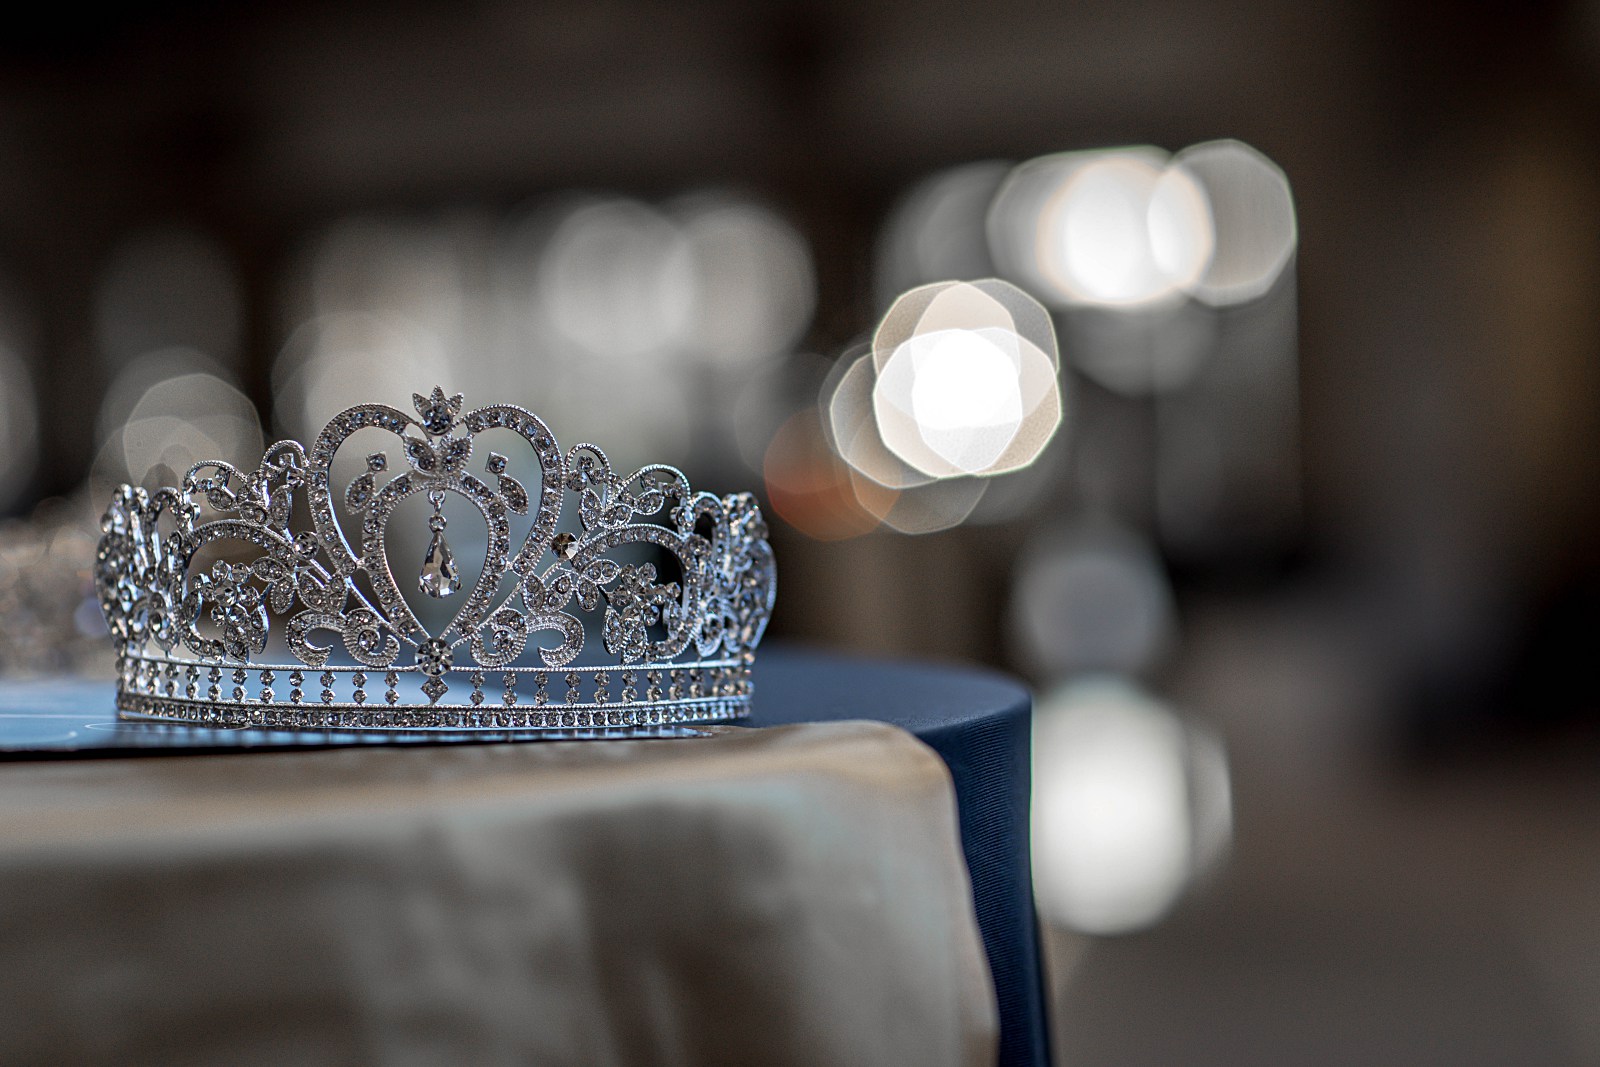 I guessed correctly and the girl from Ohio, Halle Berry, was crowned the winner. She was the reigning teen beauty queen. #beauty #pageant #story